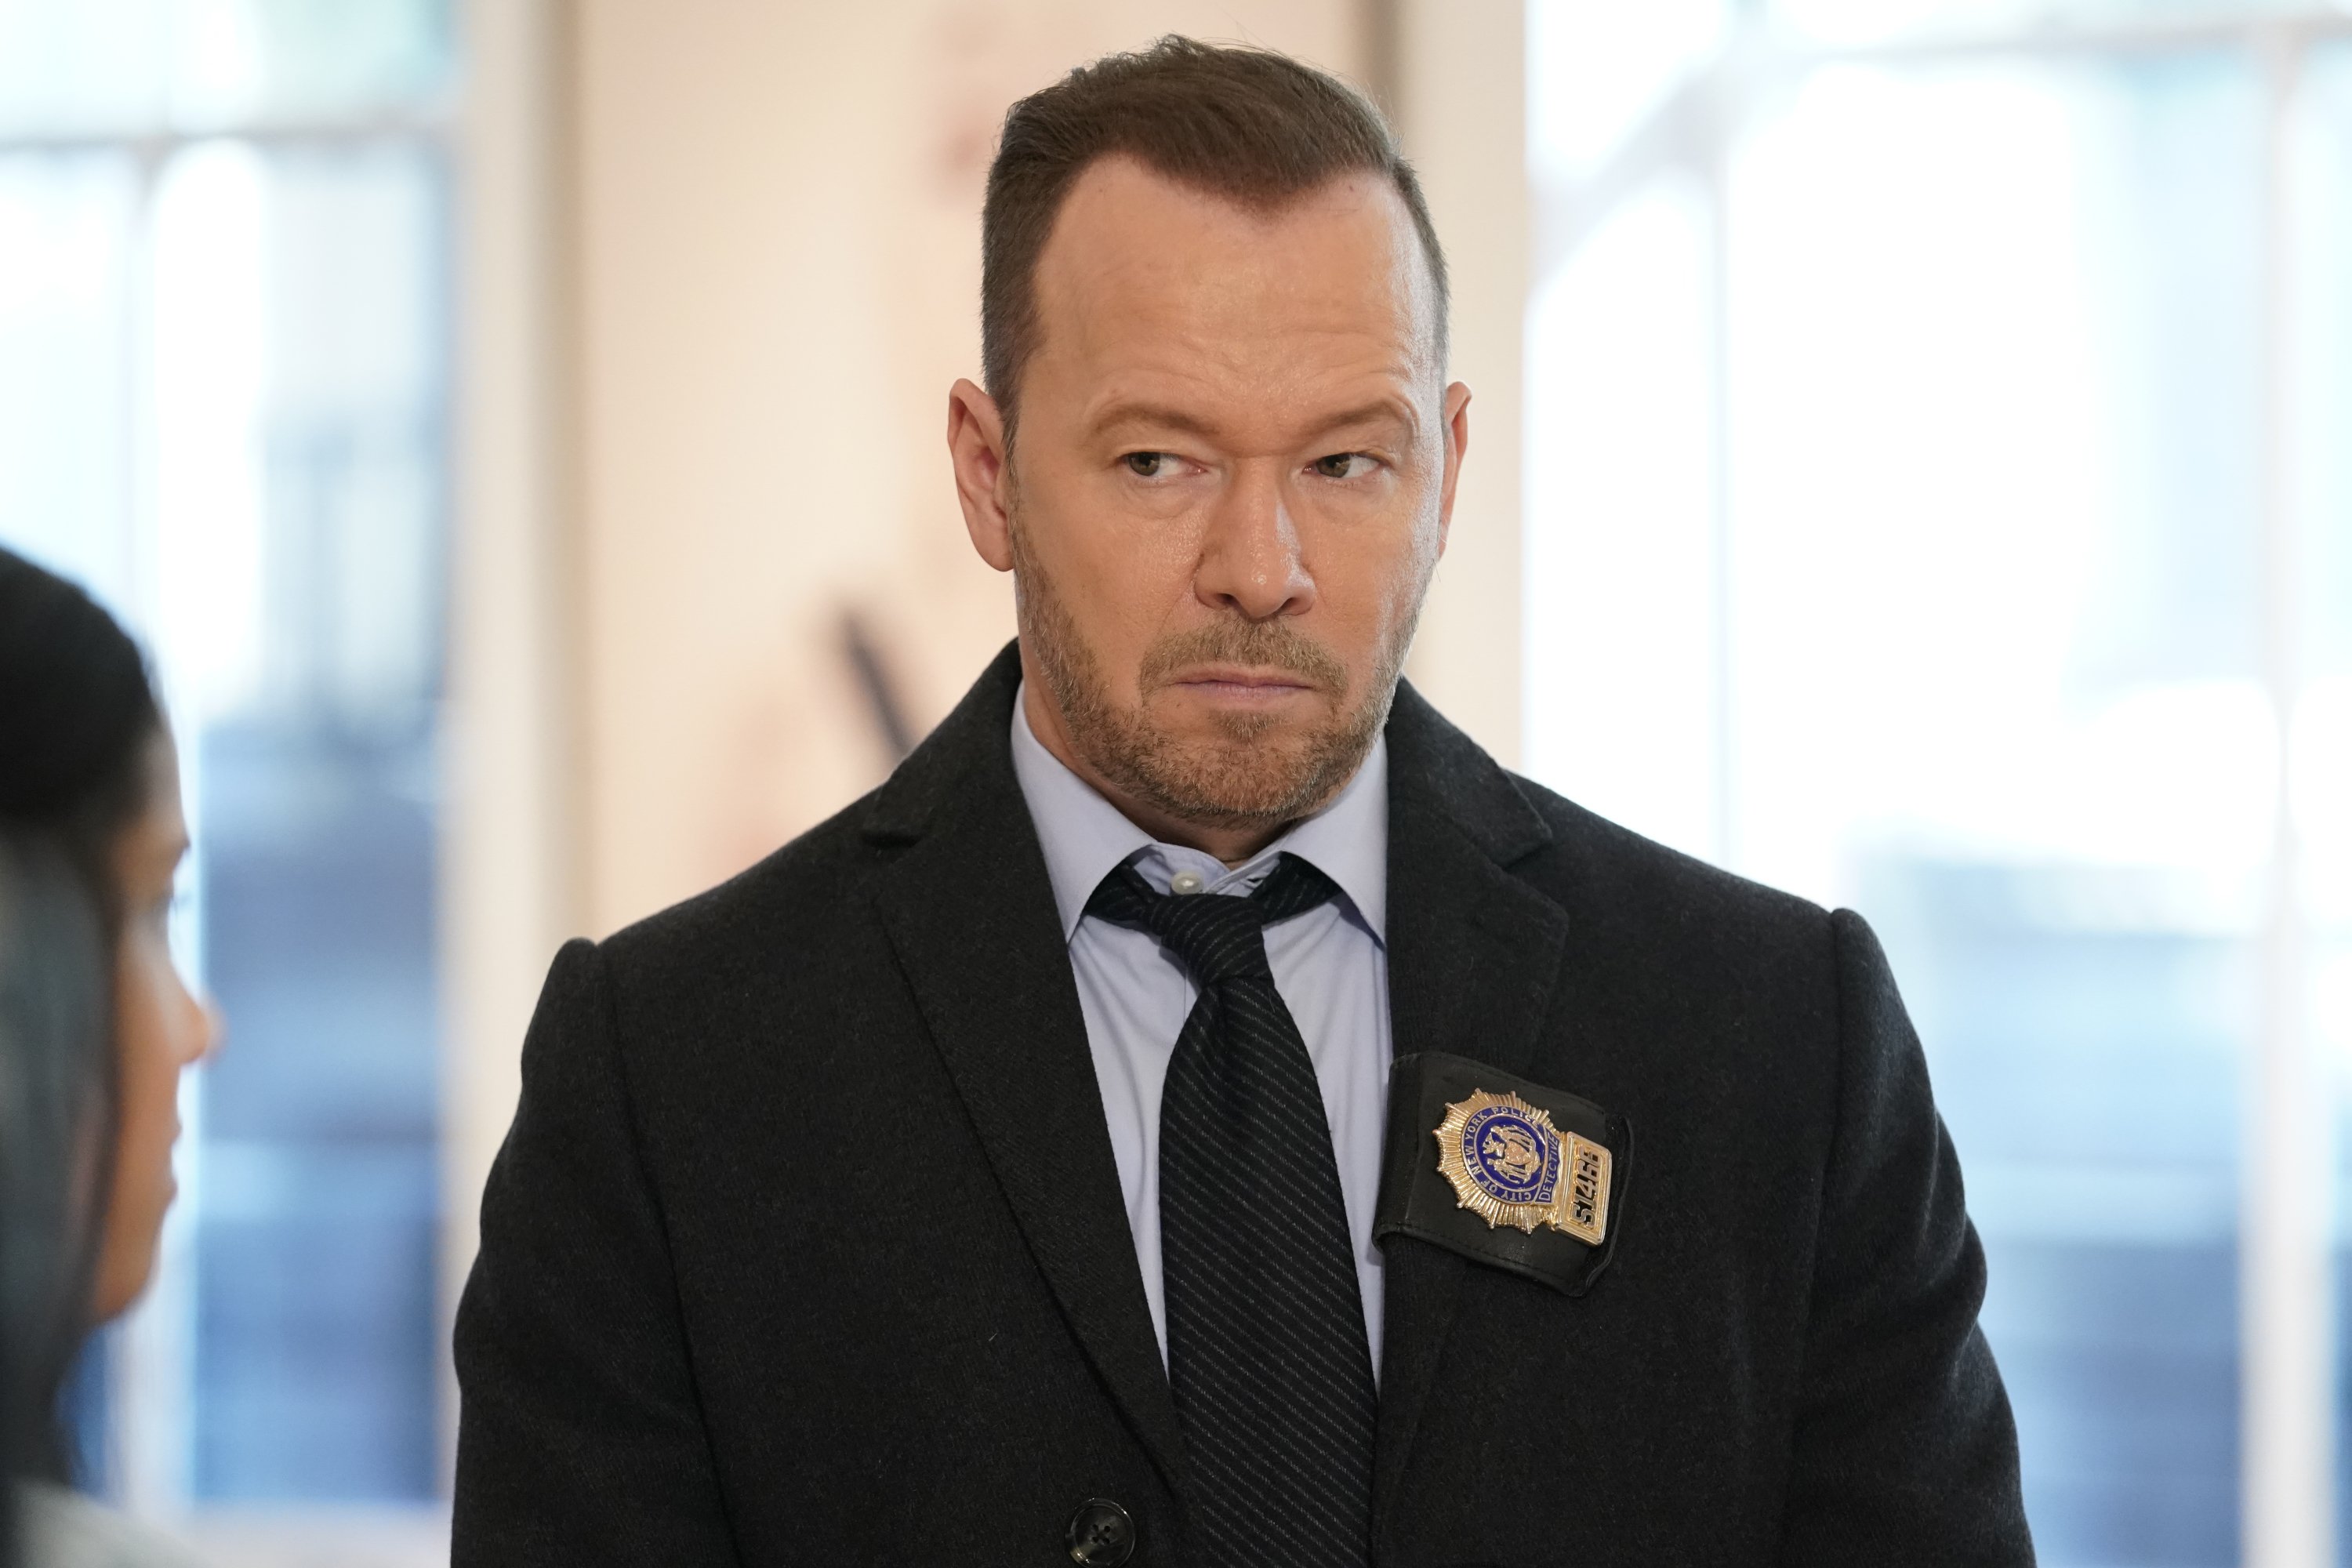 Donnie Wahlberg pictured with a serious look on his face in the 2010 TV drama "Blue Bloods."  | Photo: Getty Images